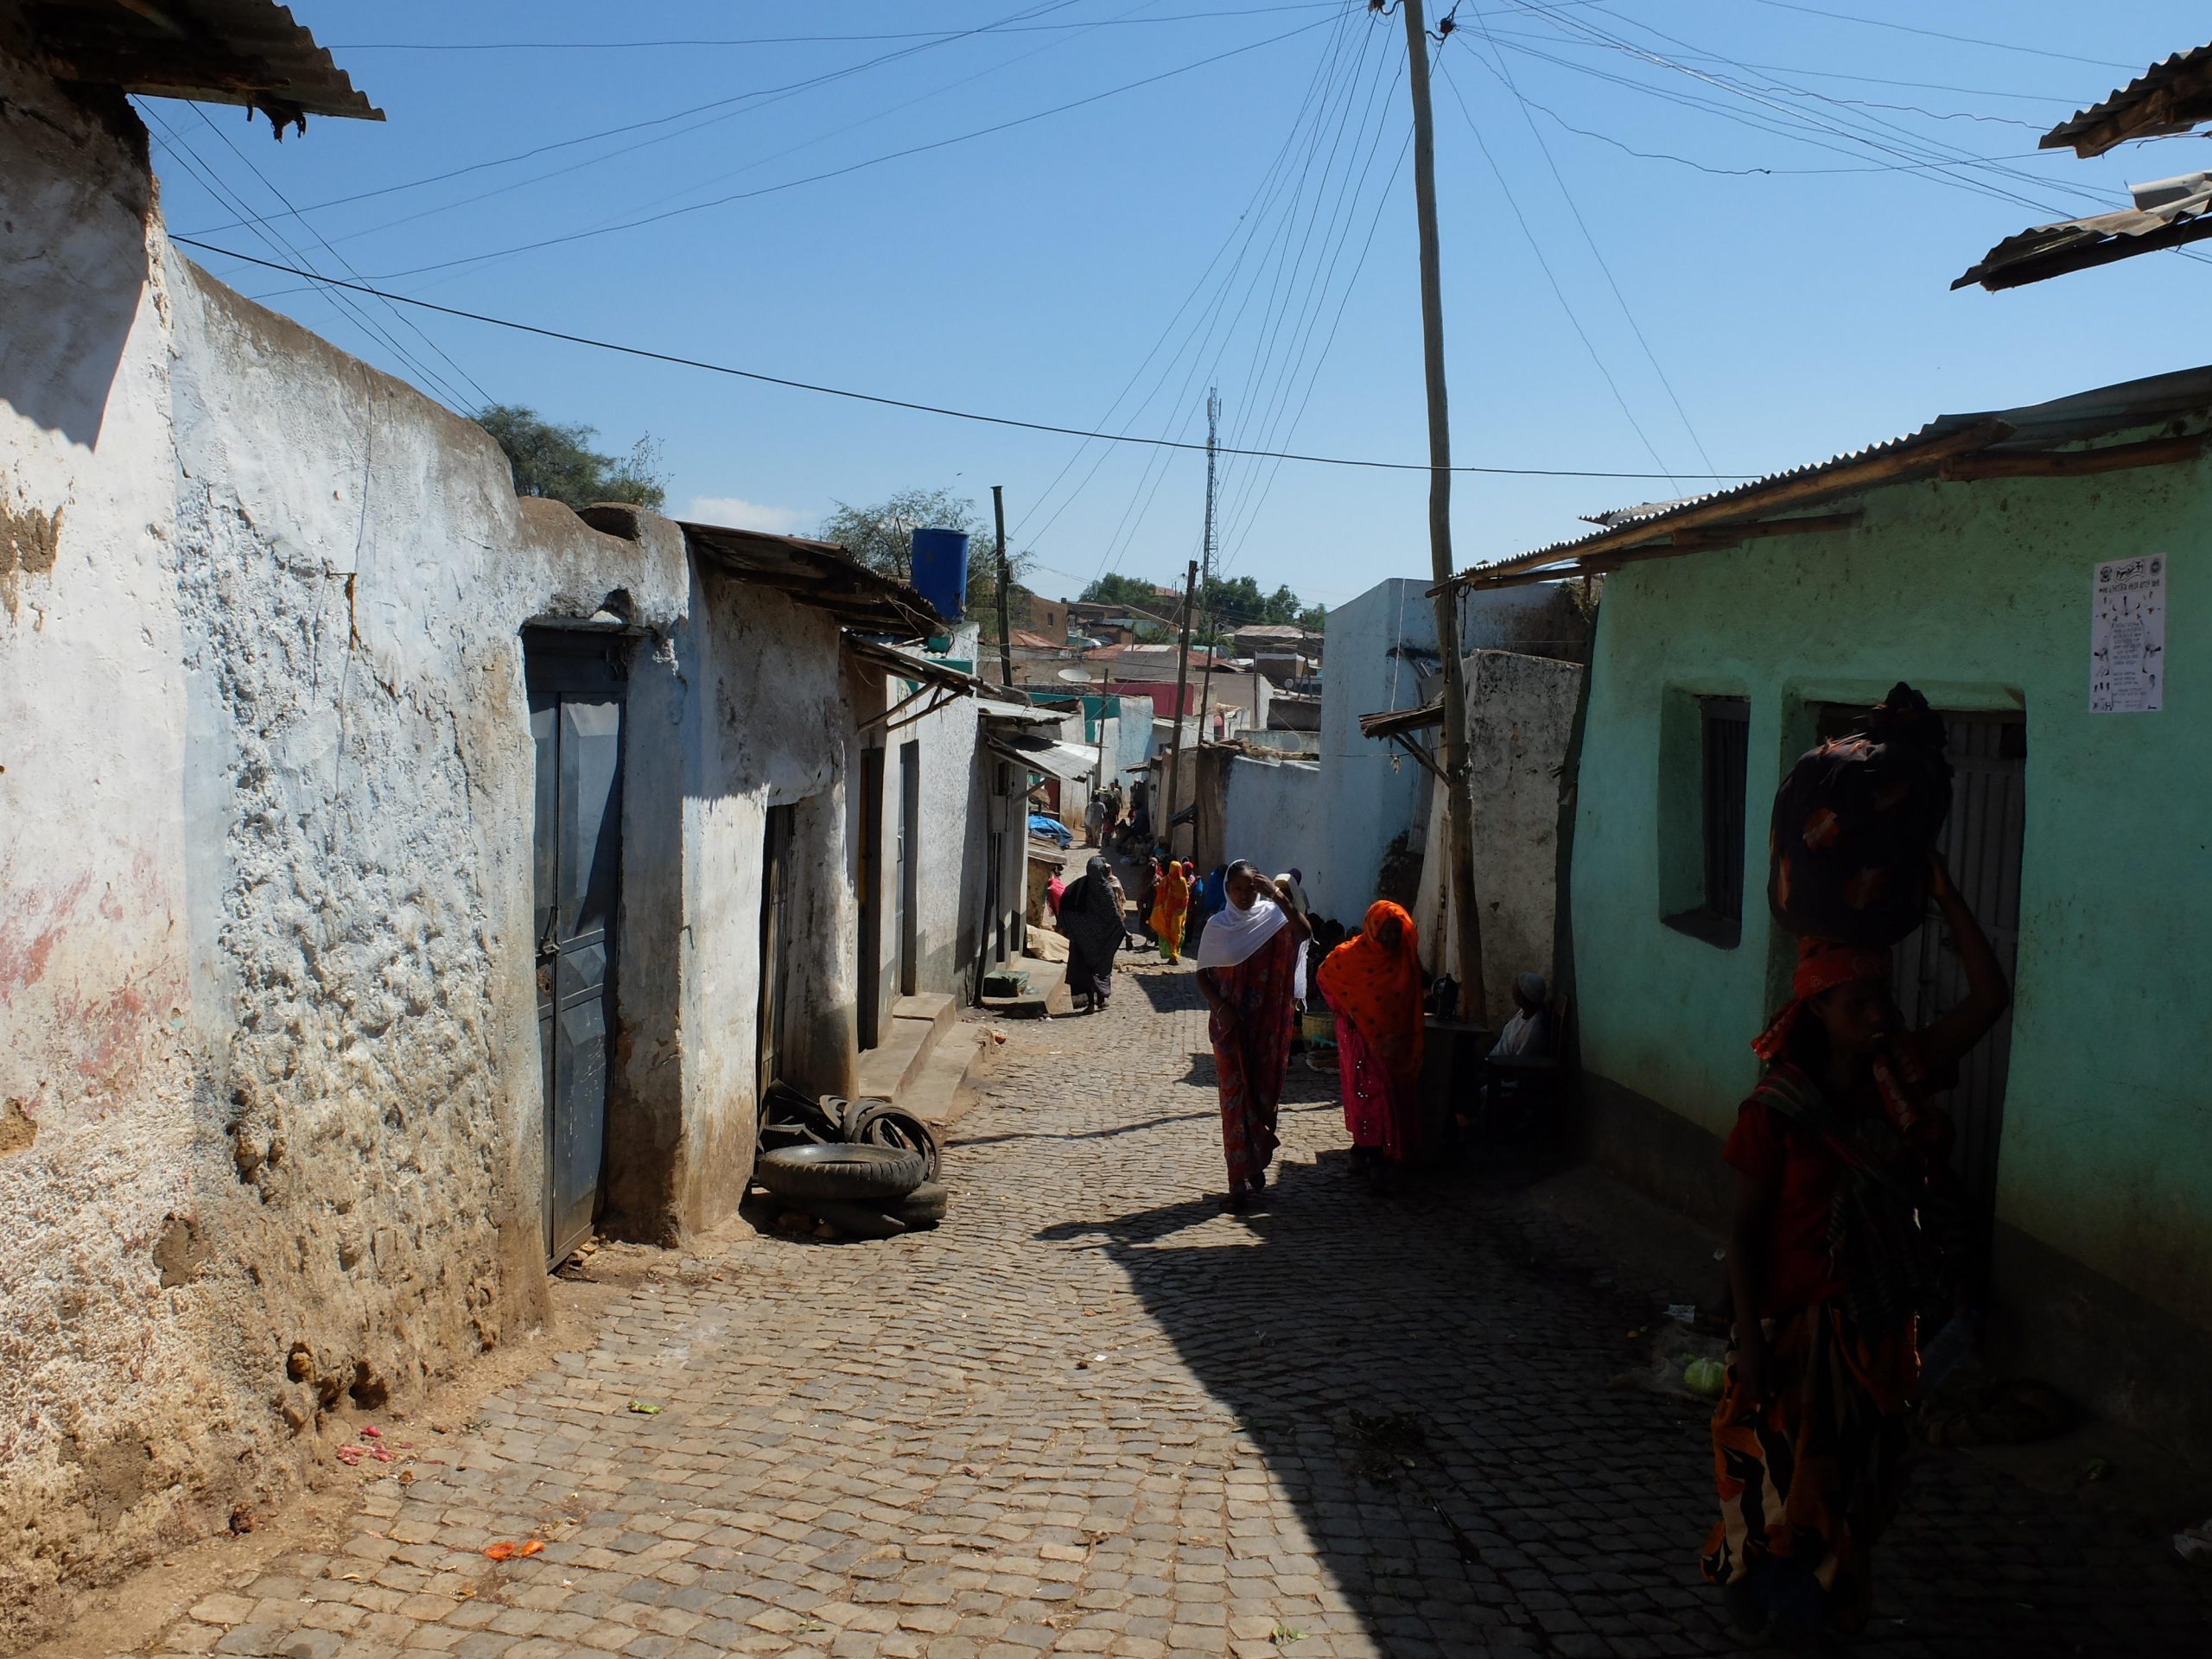 Hyenas, Coffee, And Qat - The City Of Harar In Ethiopia Offers Much To Delight